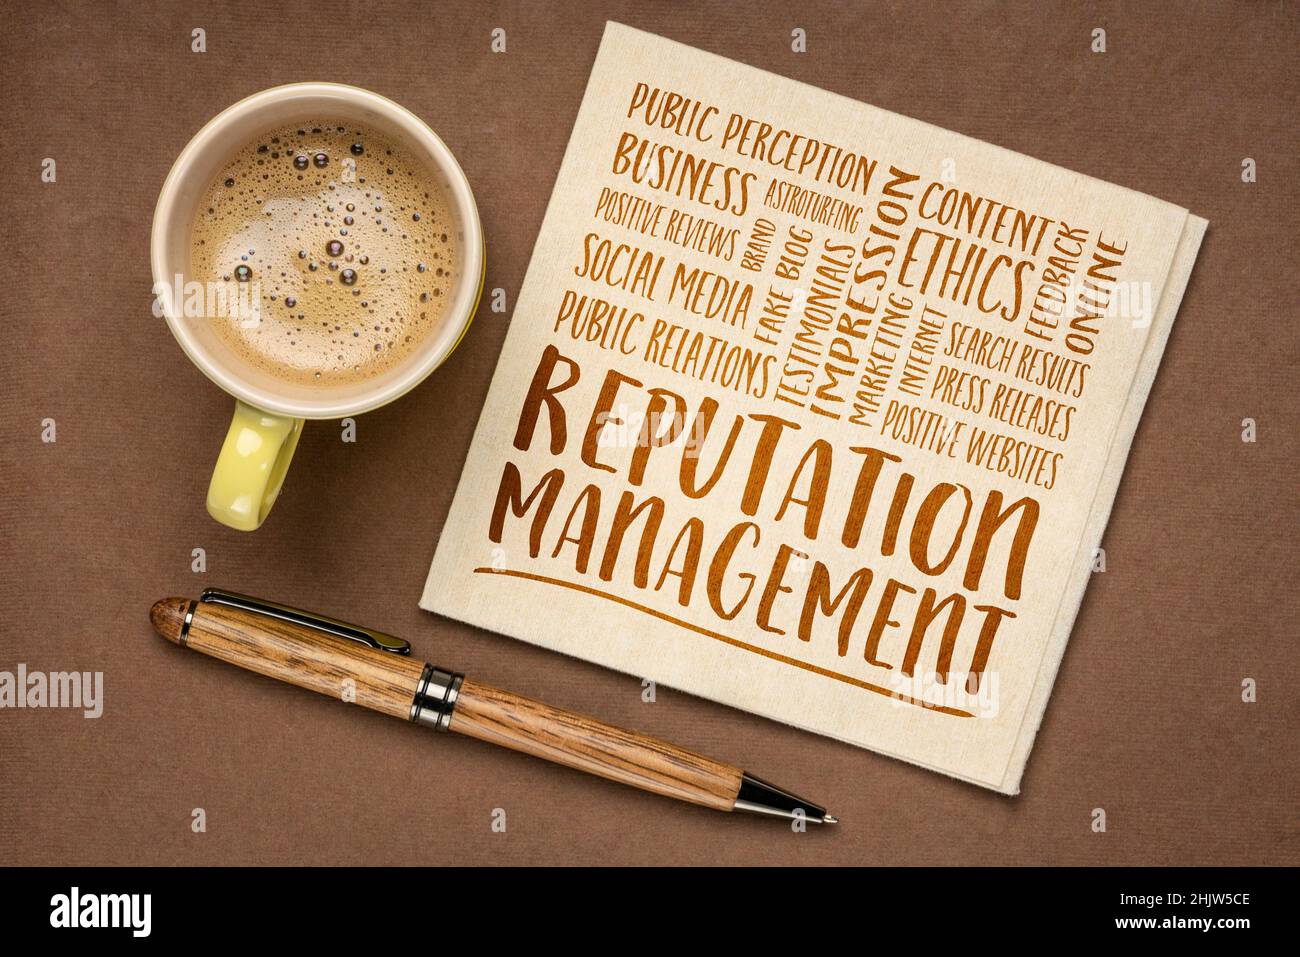 reputation management word cloud, handwriting on a napkin with a cup of coffee, business and public relations concept Stock Photo